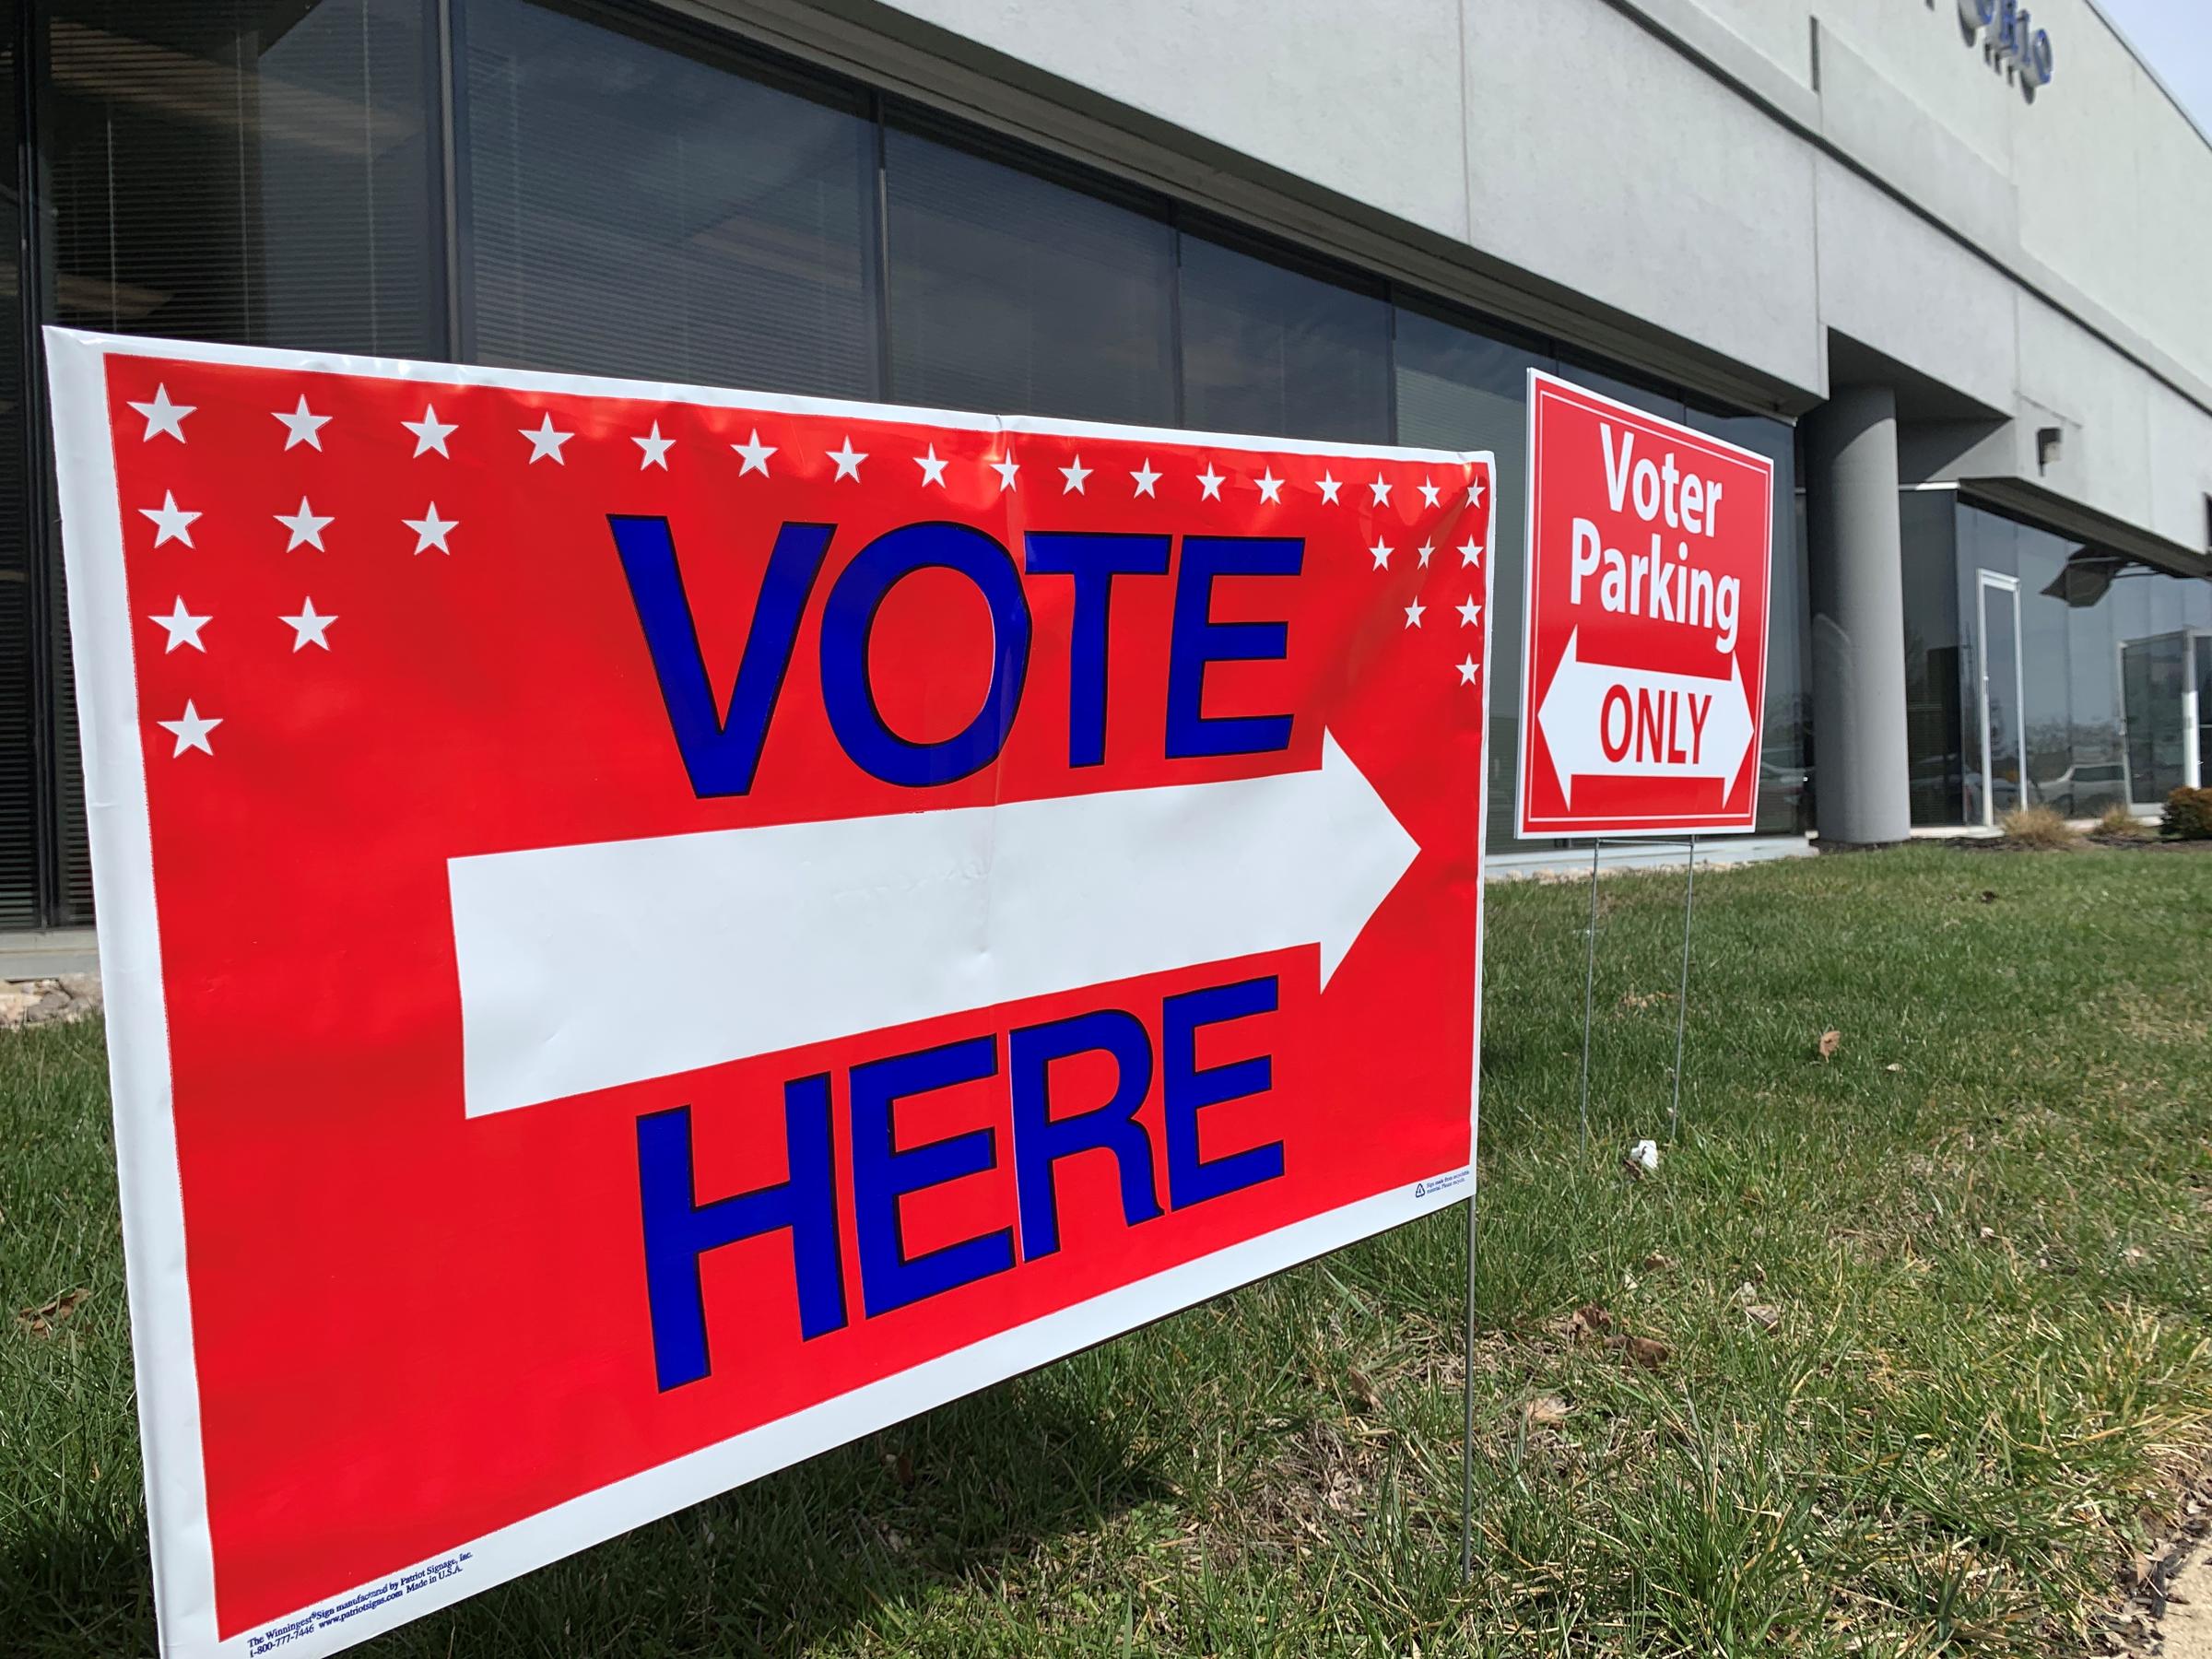 Hamilton County Board Of Elections Says It's Ready For Ohio Primary